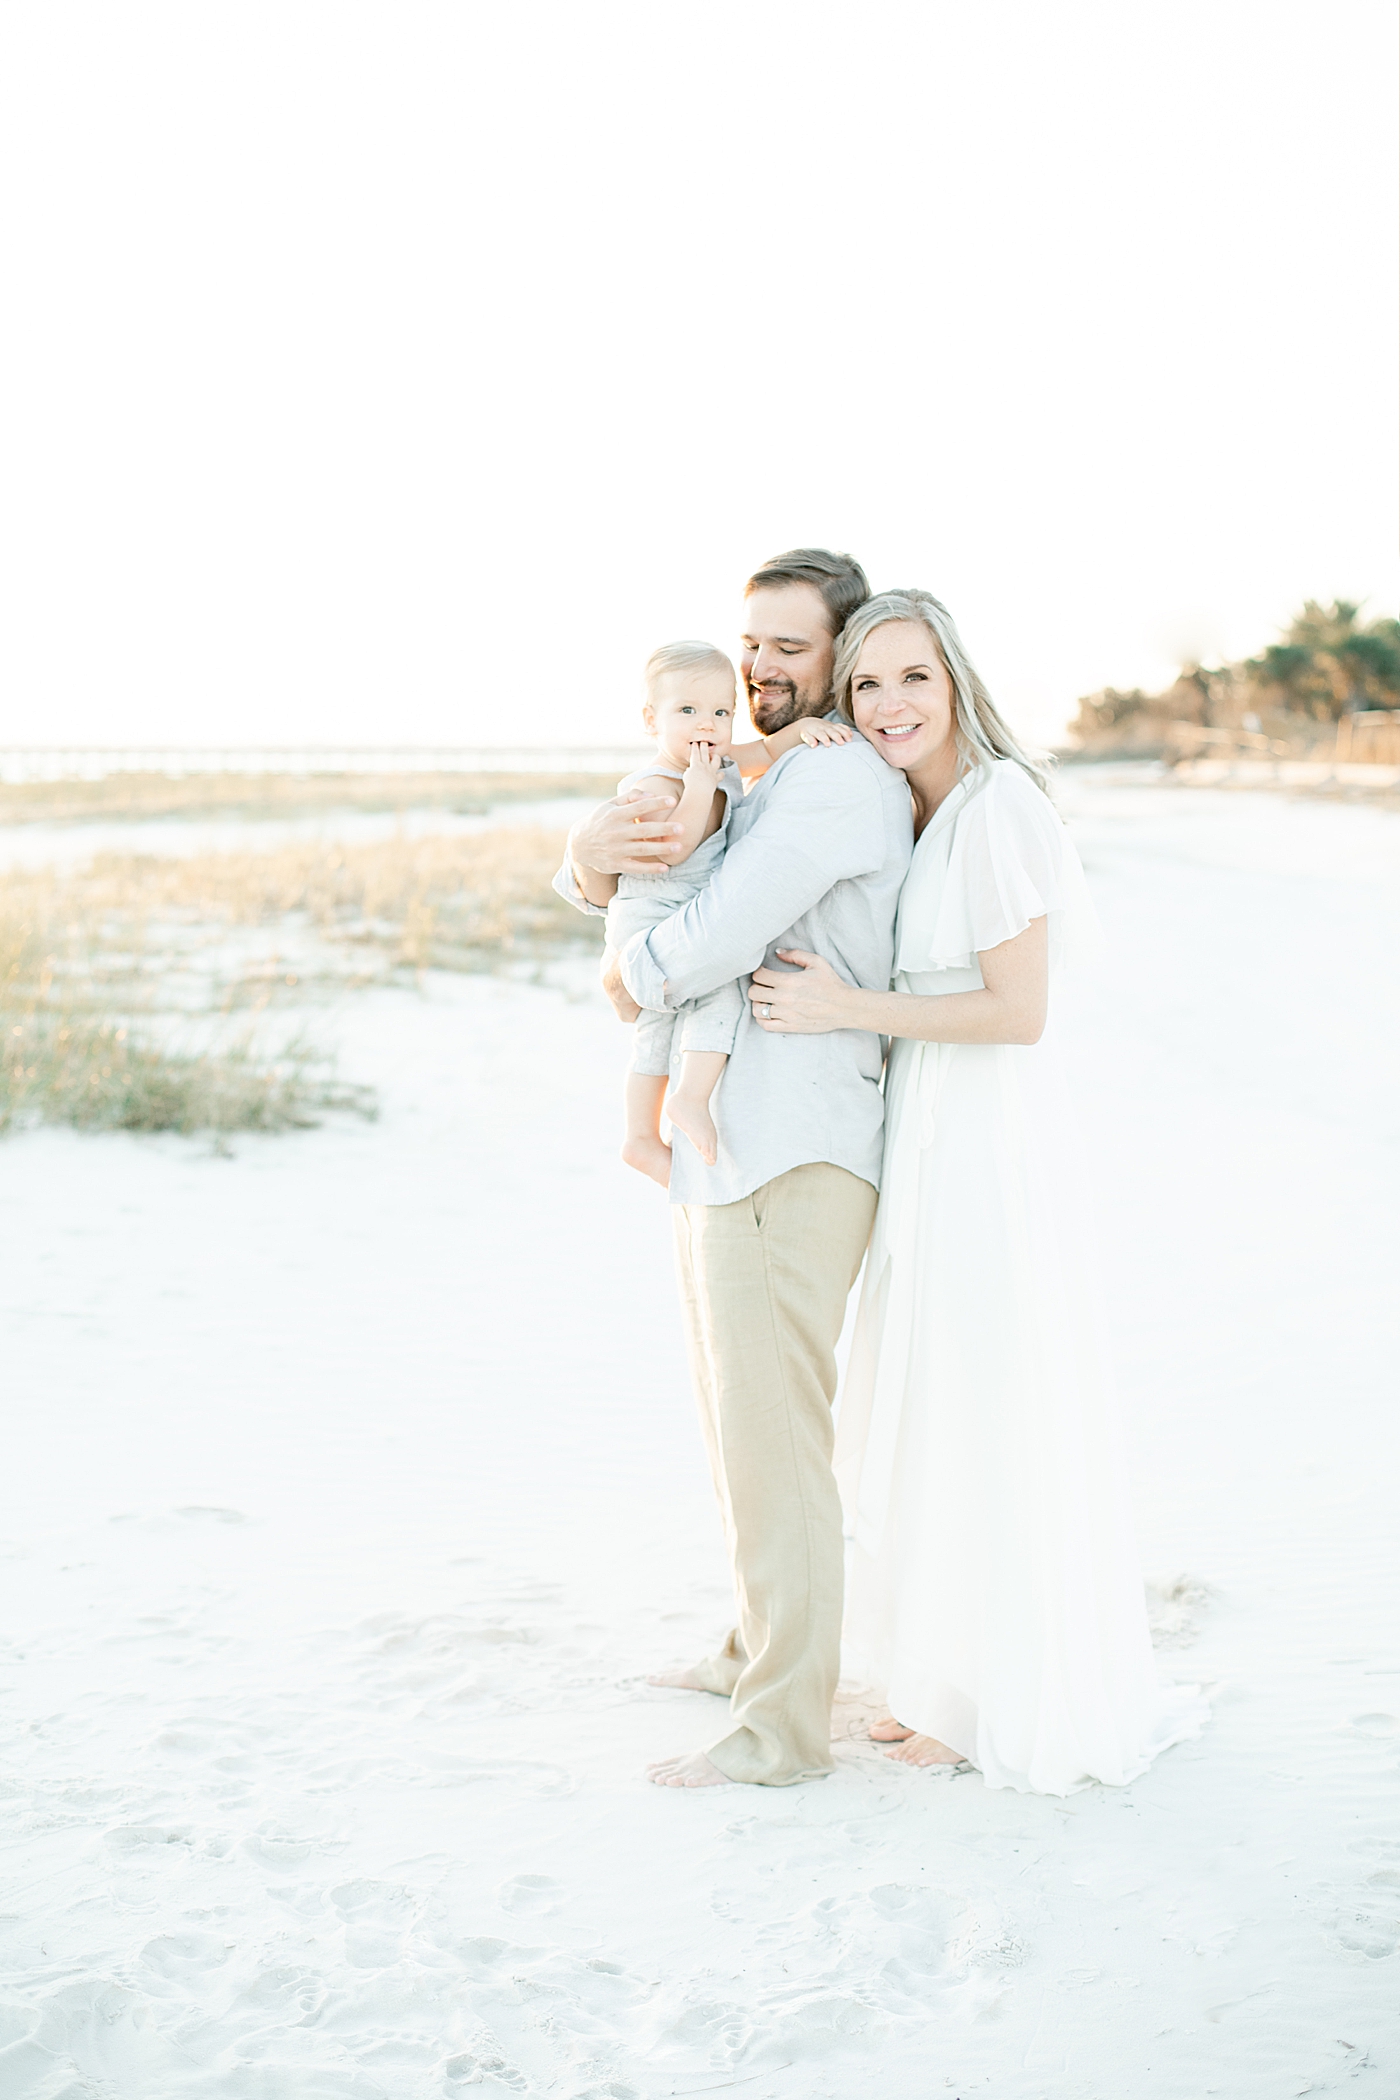 Sunset beach session with family. Photo by Little Sunshine Photography.